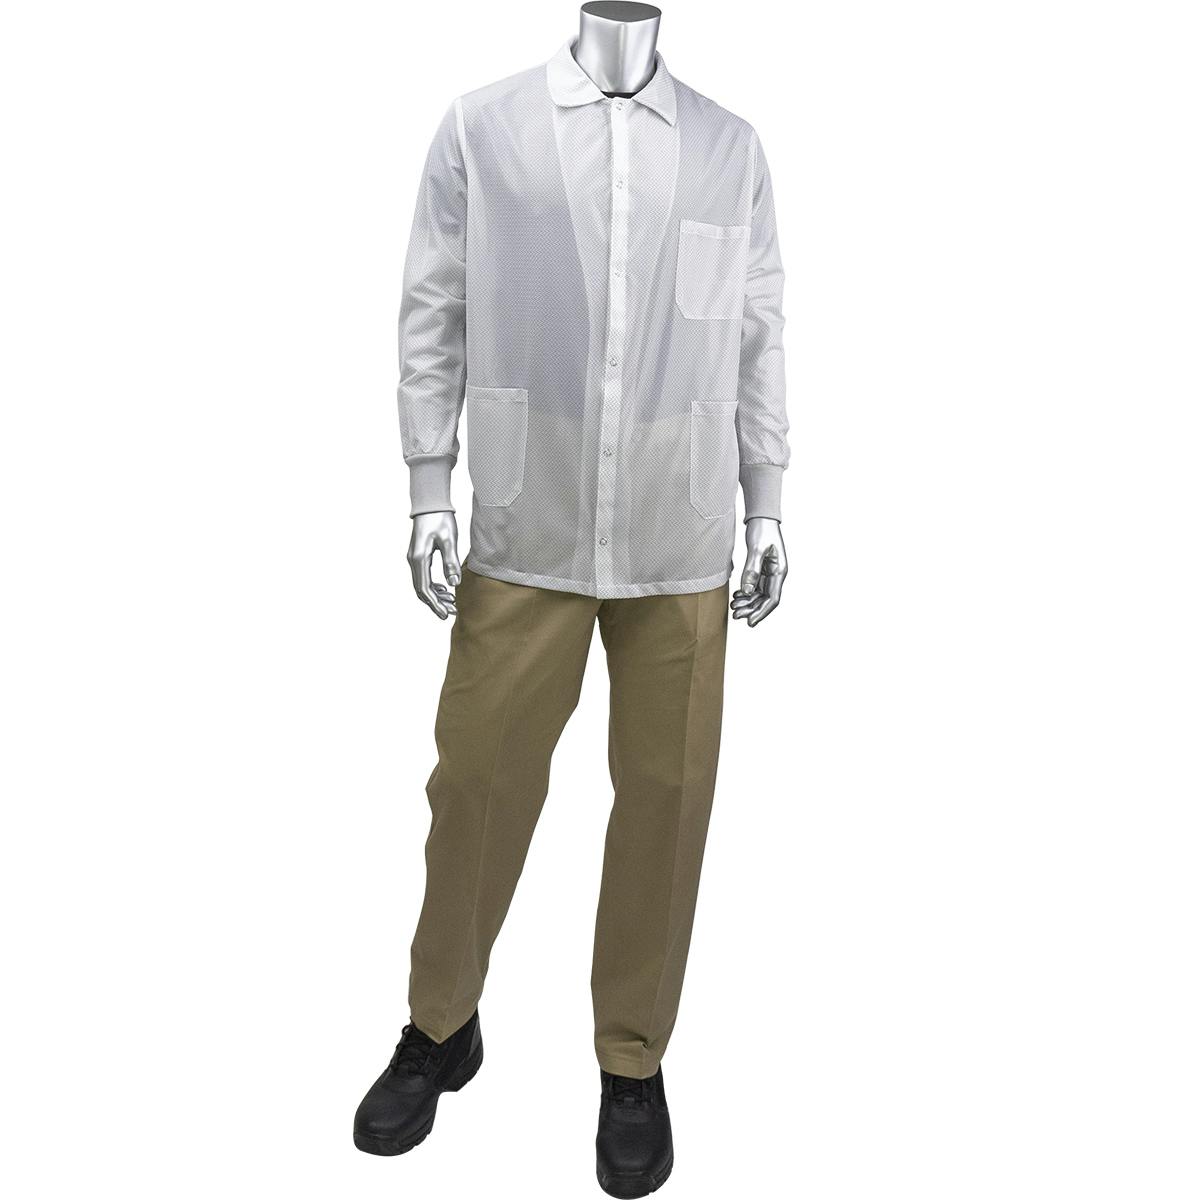 StatStar Short ESD Labcoat - ESD Knit Cuff, White (BR49AC-44WH)